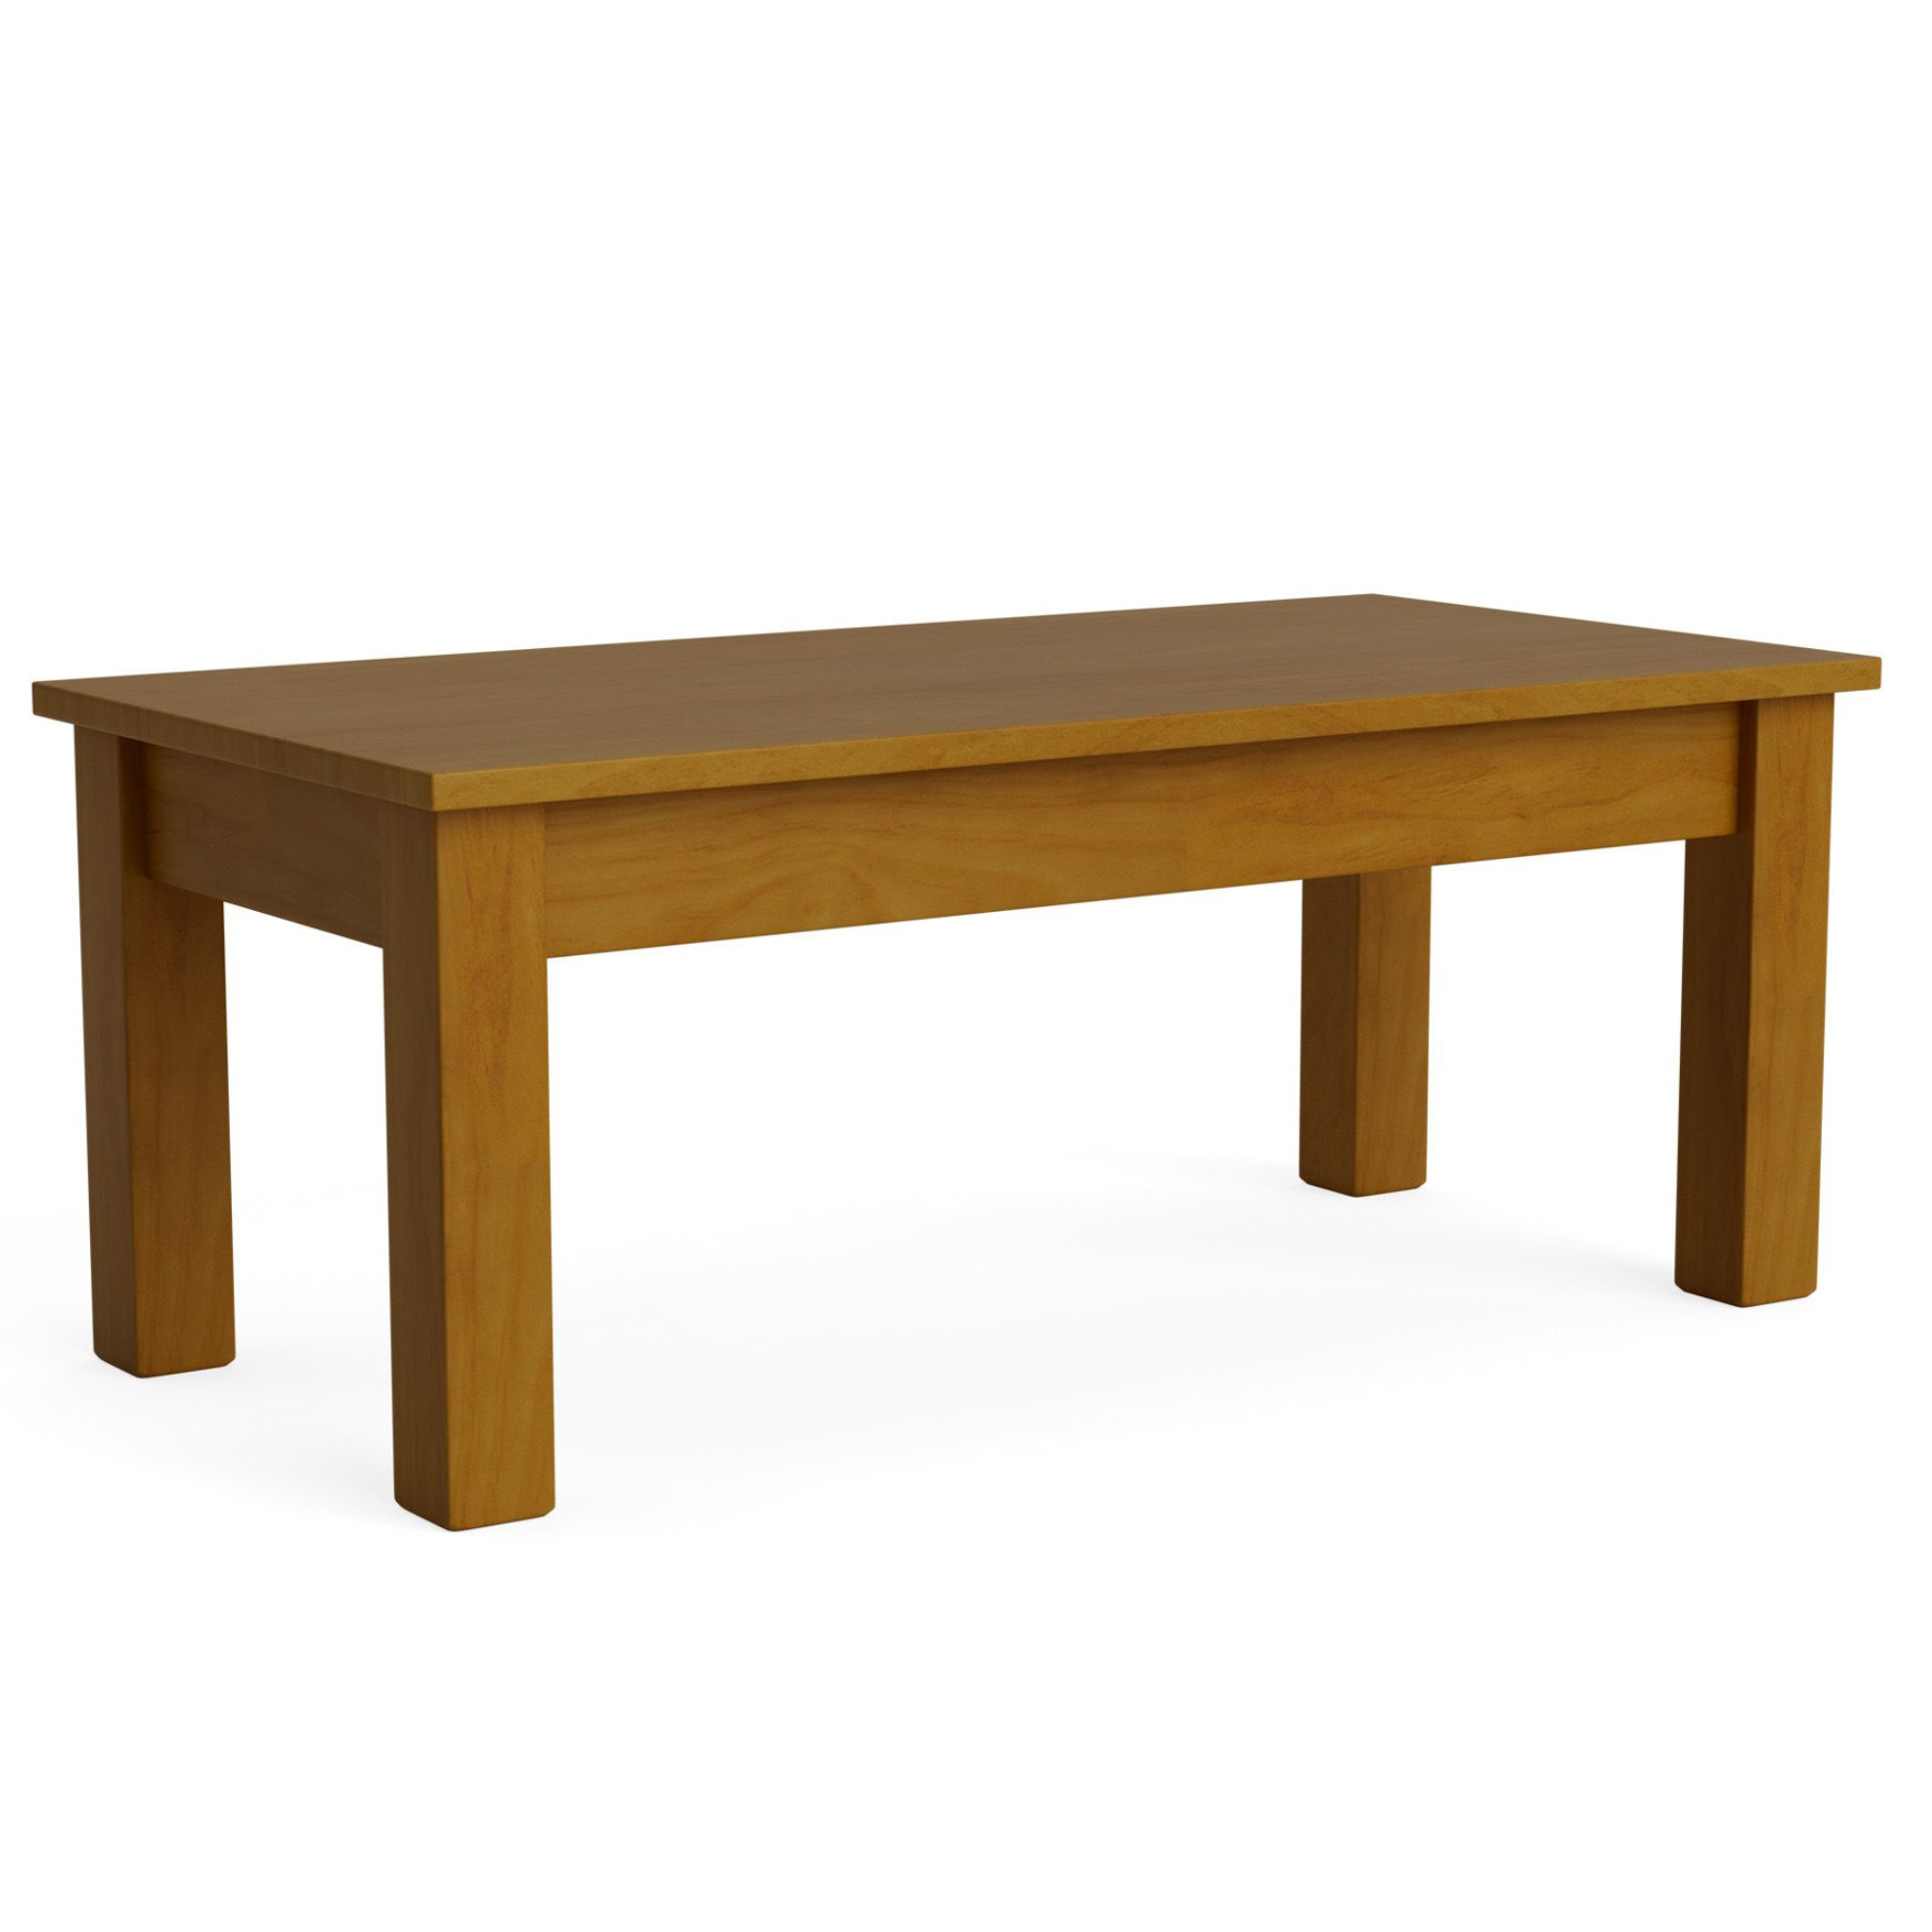 CHARLTON SOLID TIMBER COFFEE TABLE | NZ MADE